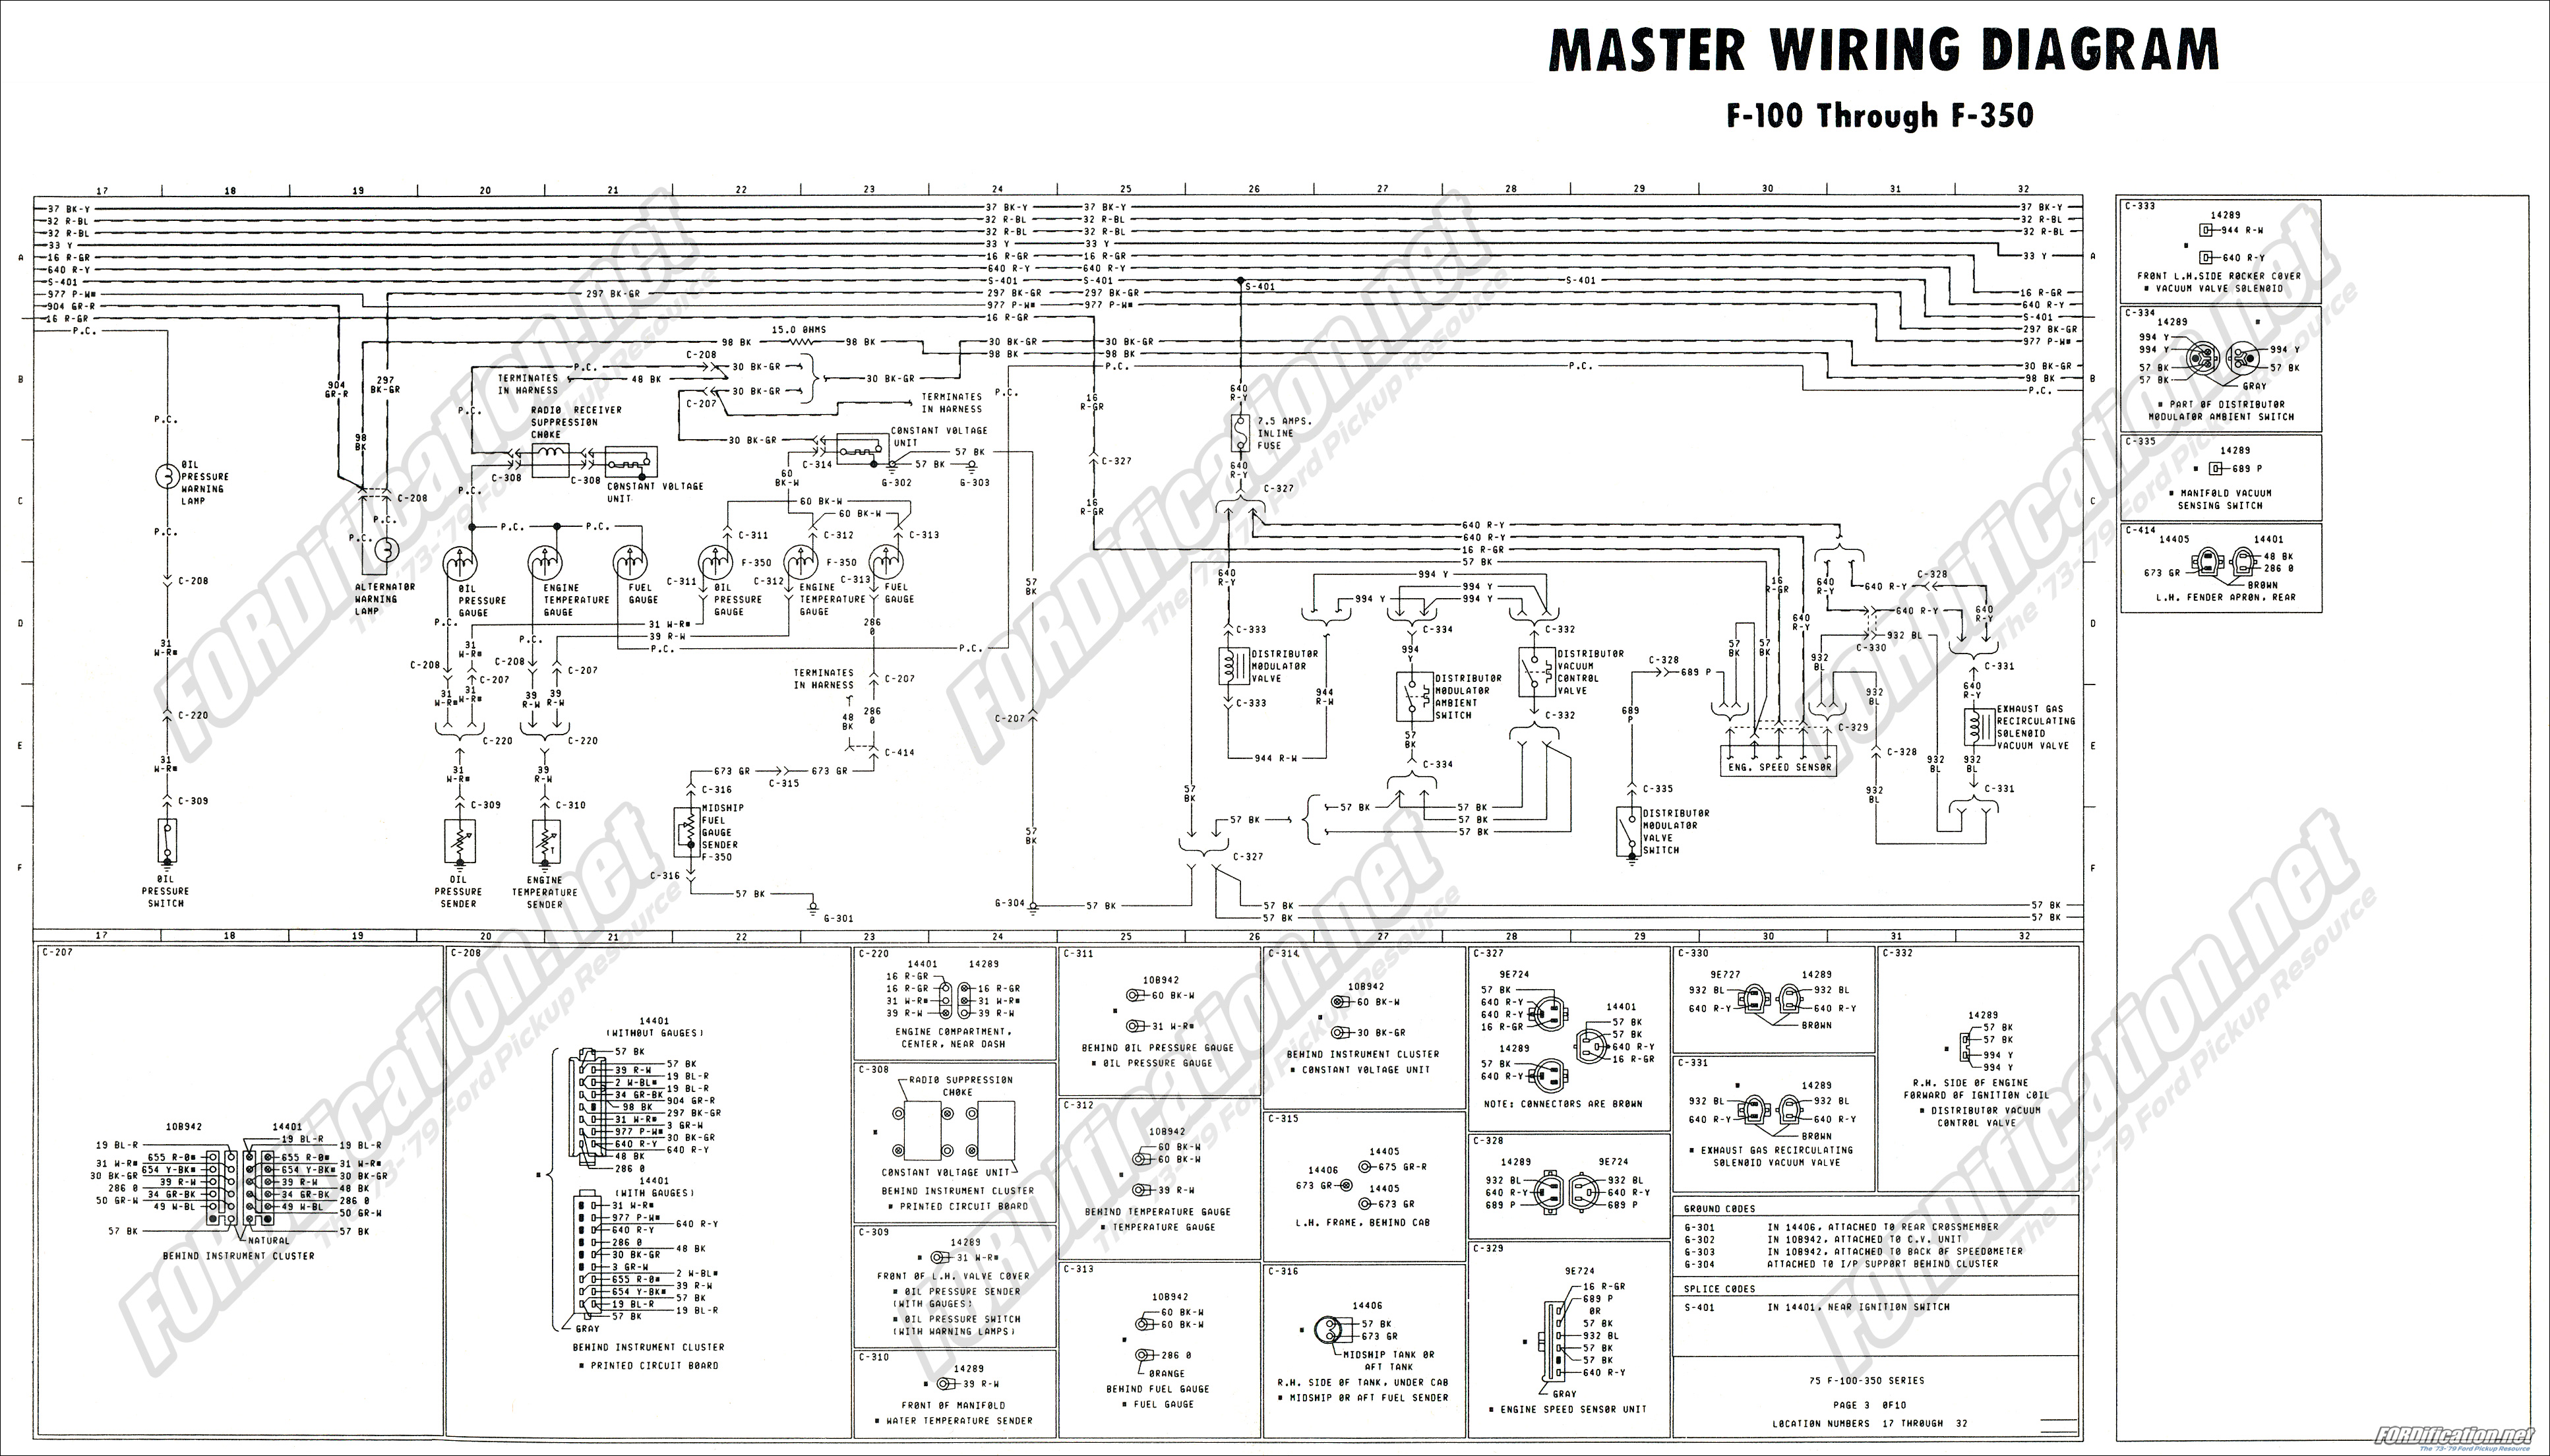 1973 1979 Ford Truck Wiring Diagrams, 1978 Ford F250 Fuel Gauge Wiring Diagram